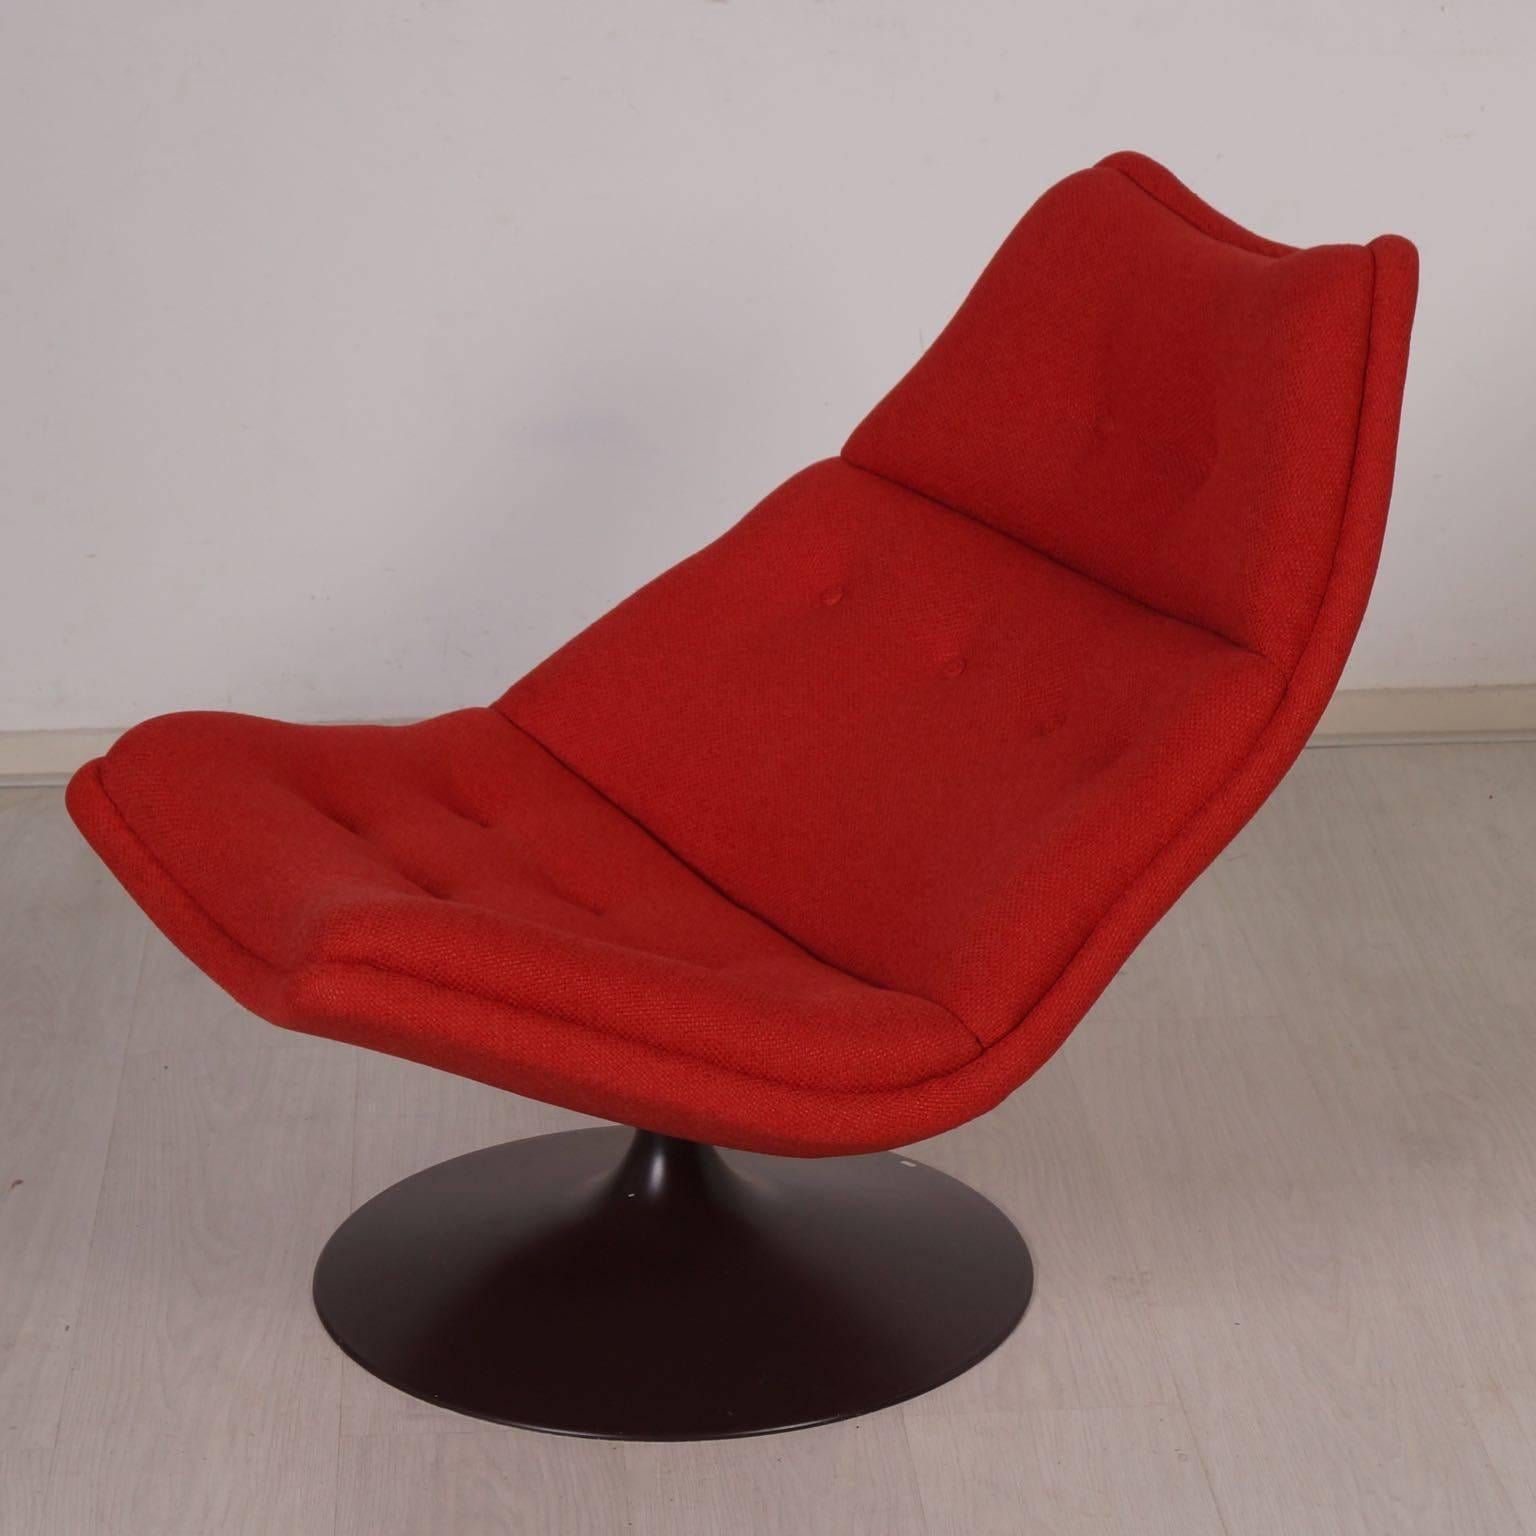 F511 ladies lounge chair by Geoffrey Harcourt for Artifort, 1966. Designed to lounge, the backrest is reclined. This swivel chair has a comfortable shell and a dark brown trumpet base. Measurements (H x W x D): 77 x 80 x 89 cm, the seat height is 39